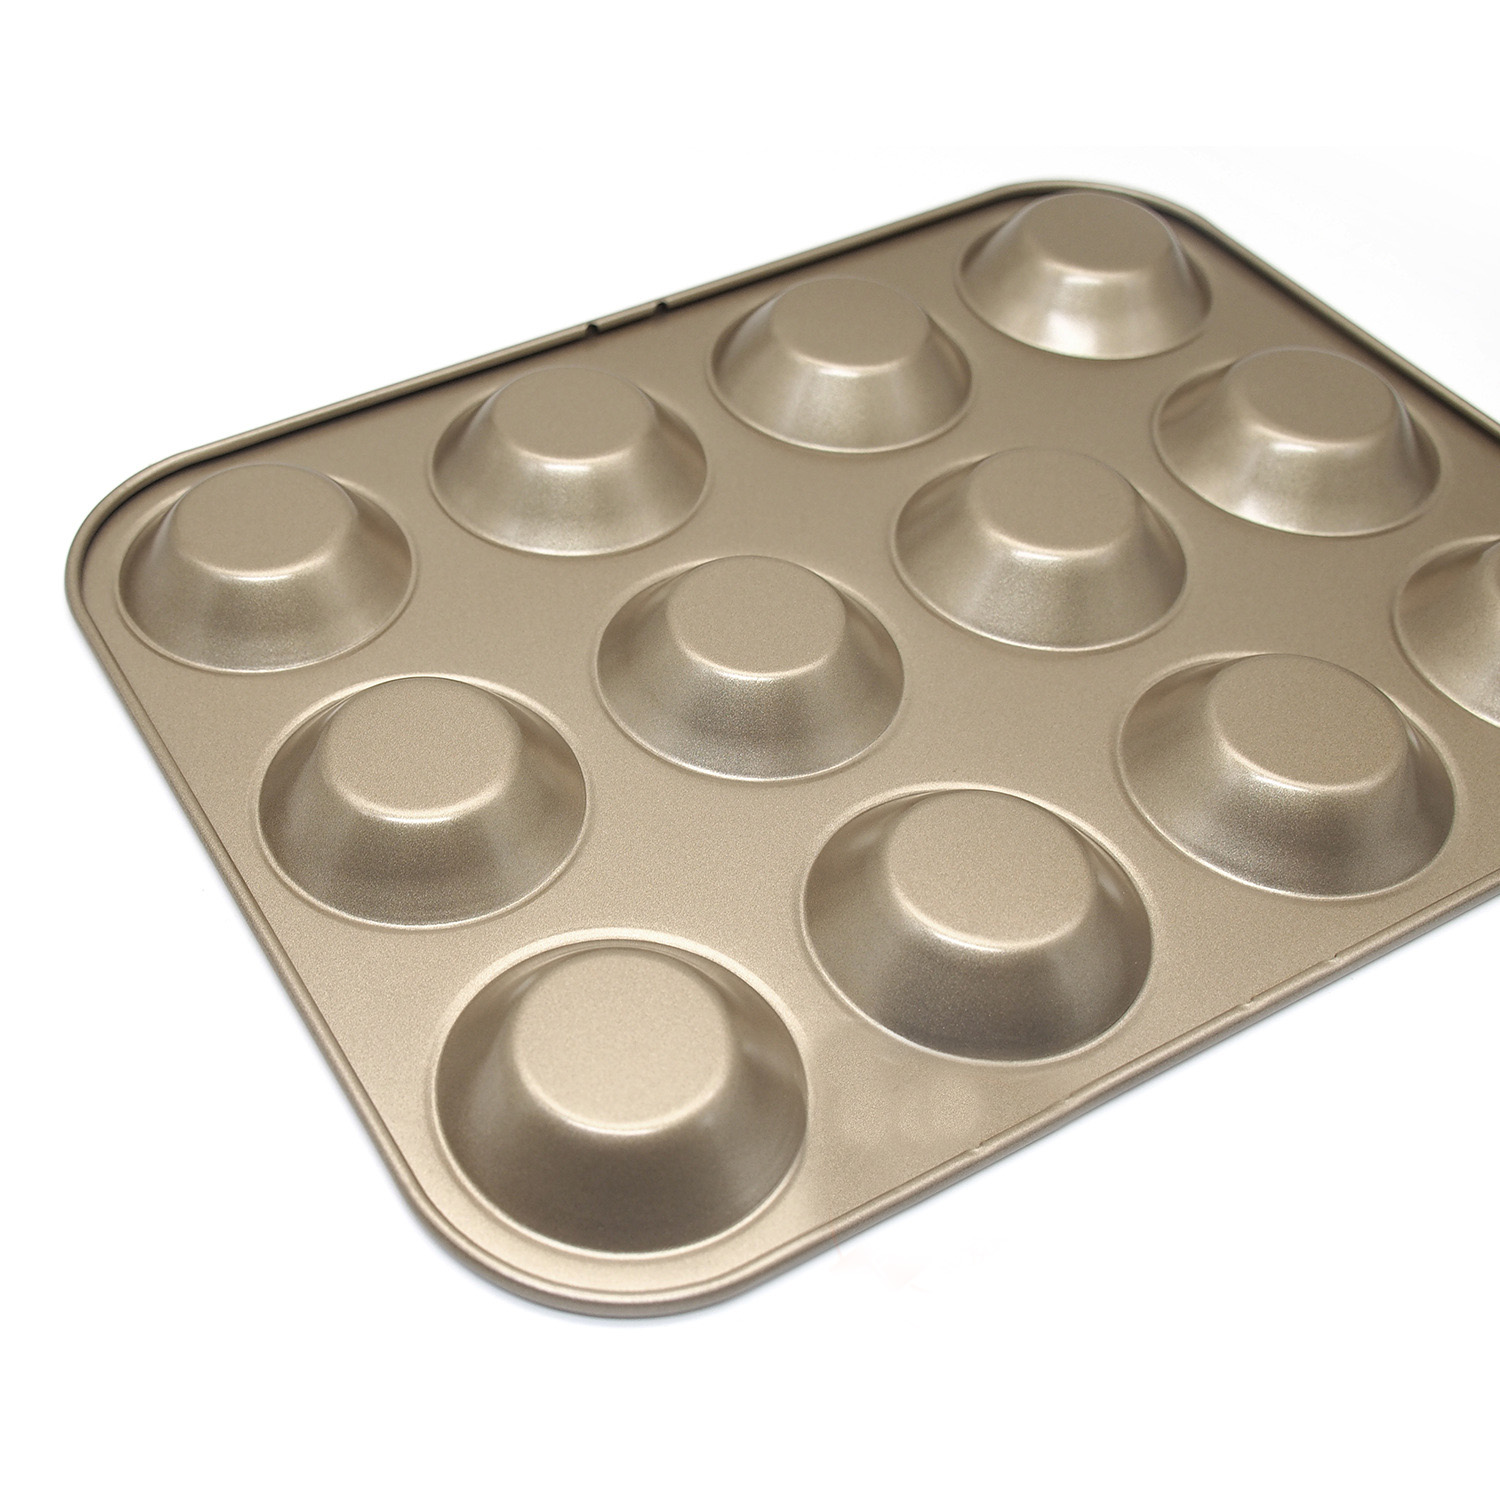 12-cup golden cupcake baking tray non-stick muffin cup baking pan